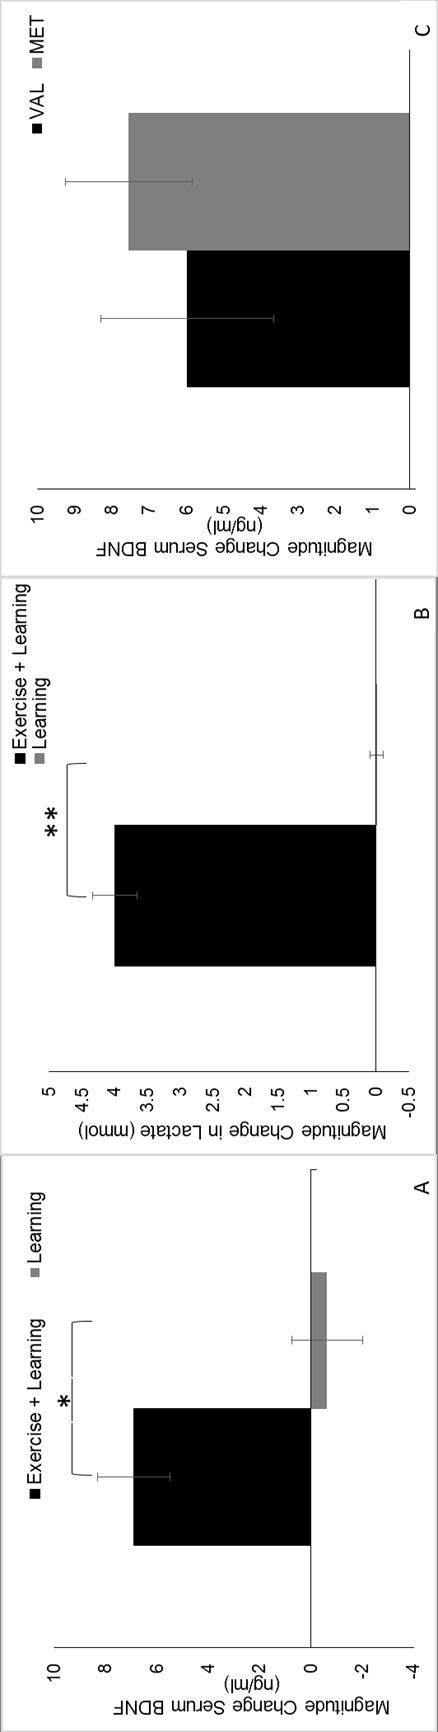 109 Figure 4.2 Magnitude change in peripheral serum BDNF (A) and Lactate (B) following high intensity upper extremity cycling (black) versus quiet sitting (gray). Data represents group averages.